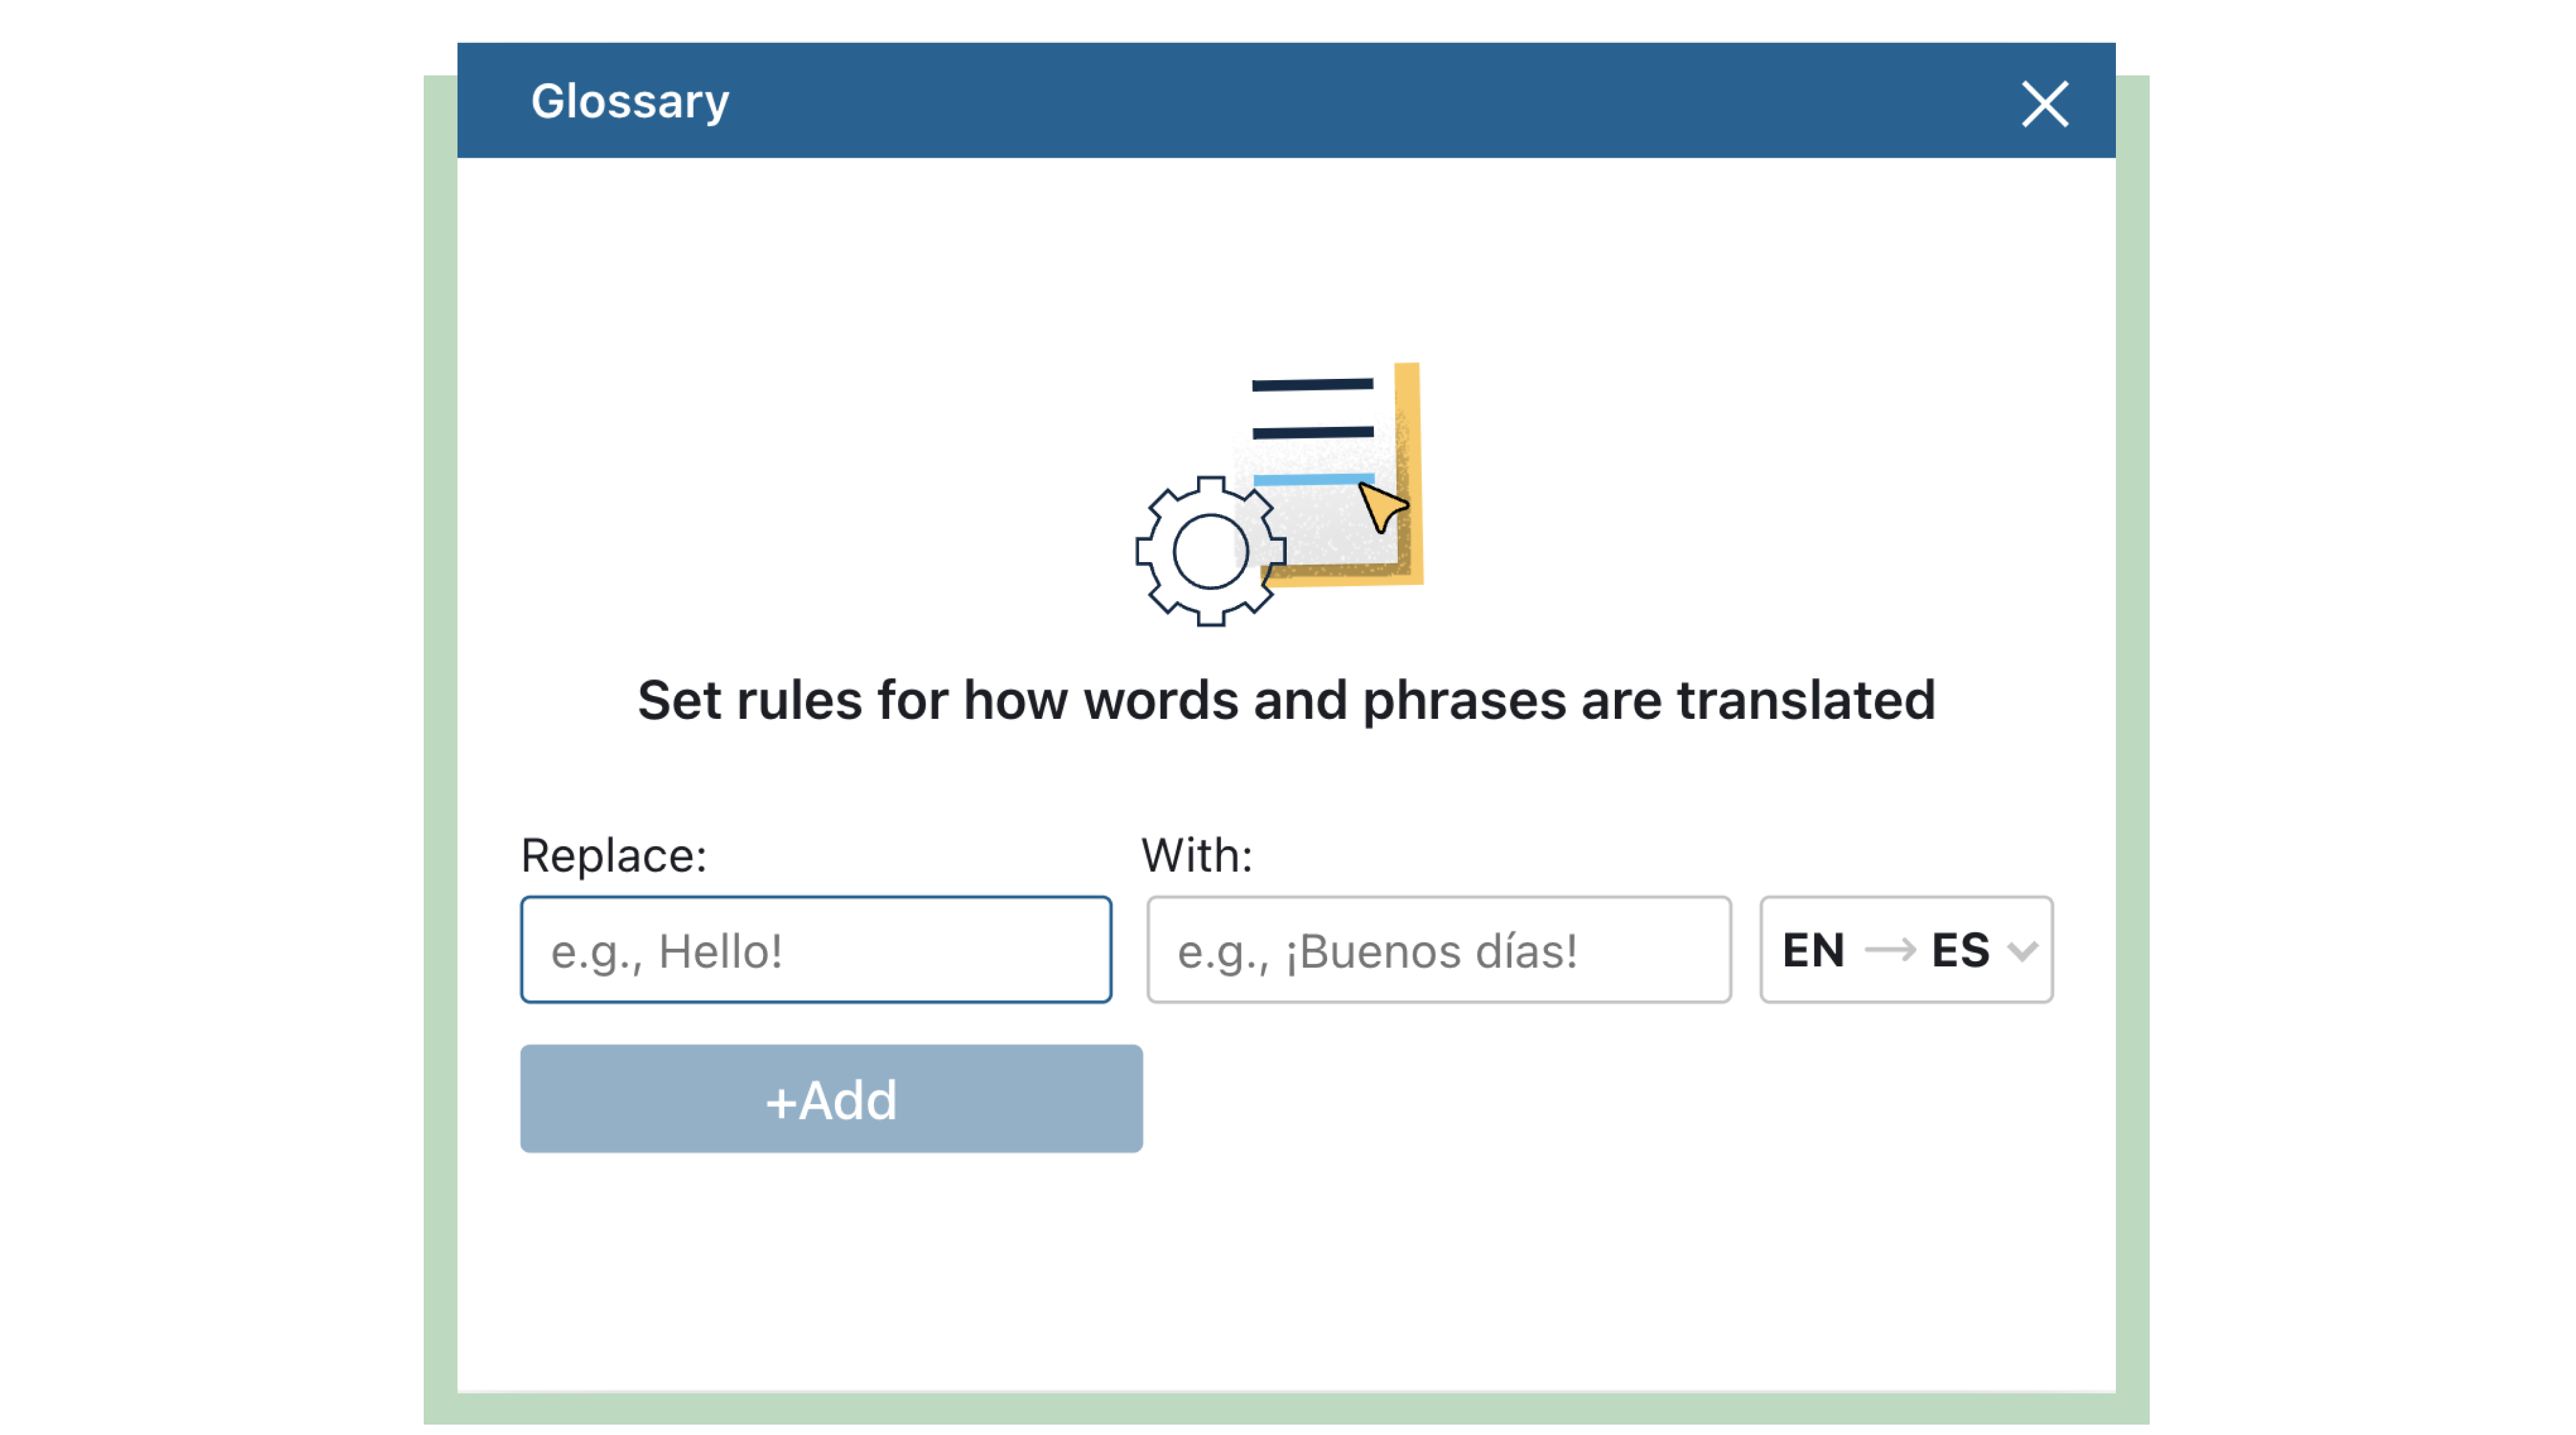 Screenshot depicting window DeepL populates if you click Glossary. DeepL asks you to type replacement words with a corresponding glossary pair.